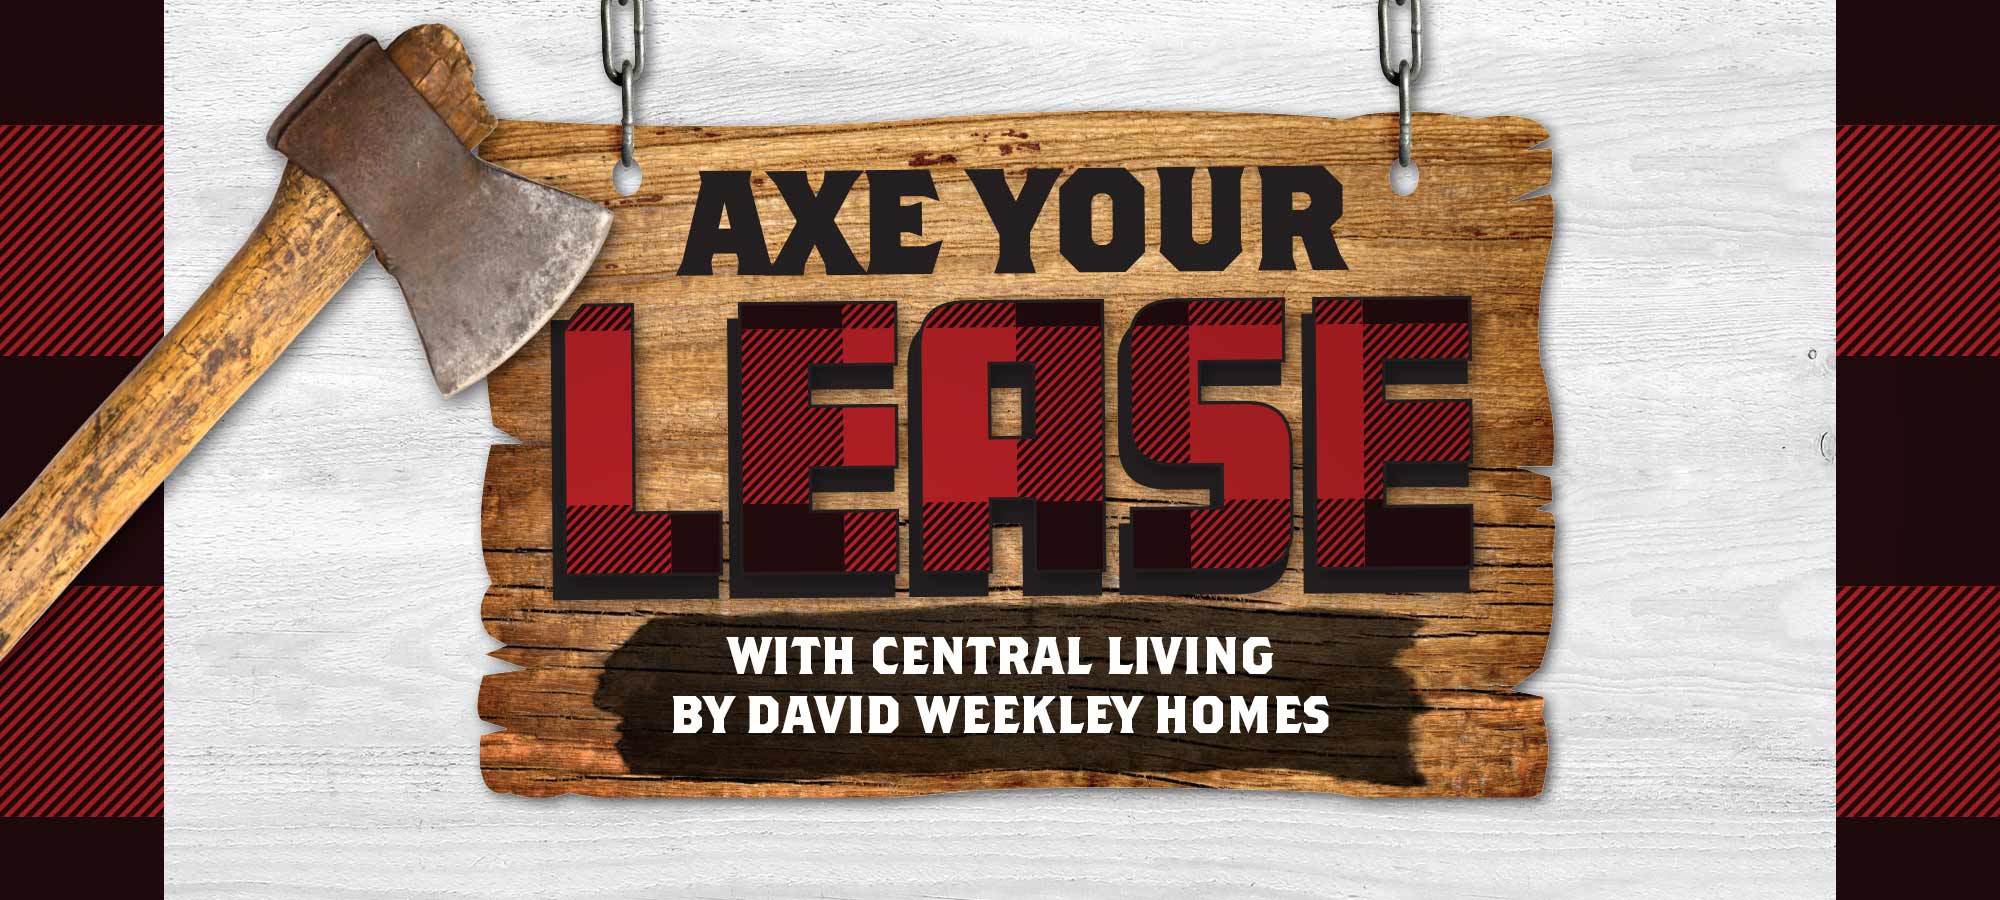 Axe Your Lease with Central Living by David Weekley Homes